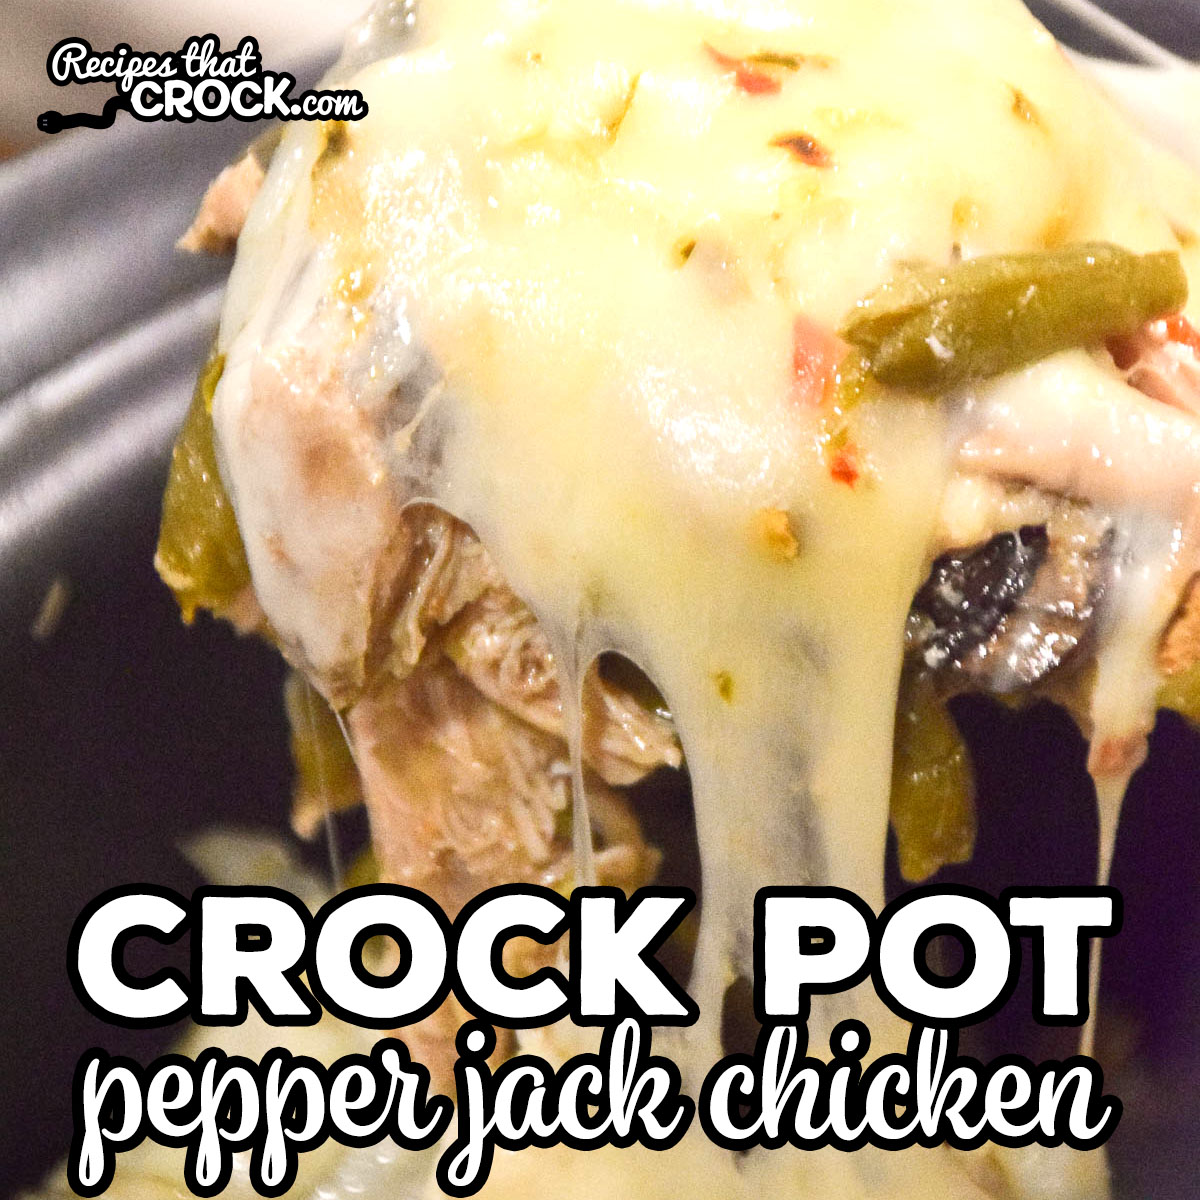 This Crock Pot Pepper Jack Chicken is one of our family's favorite slow cooker dinner recipes. It is a super simple one-pot crock pot meal.